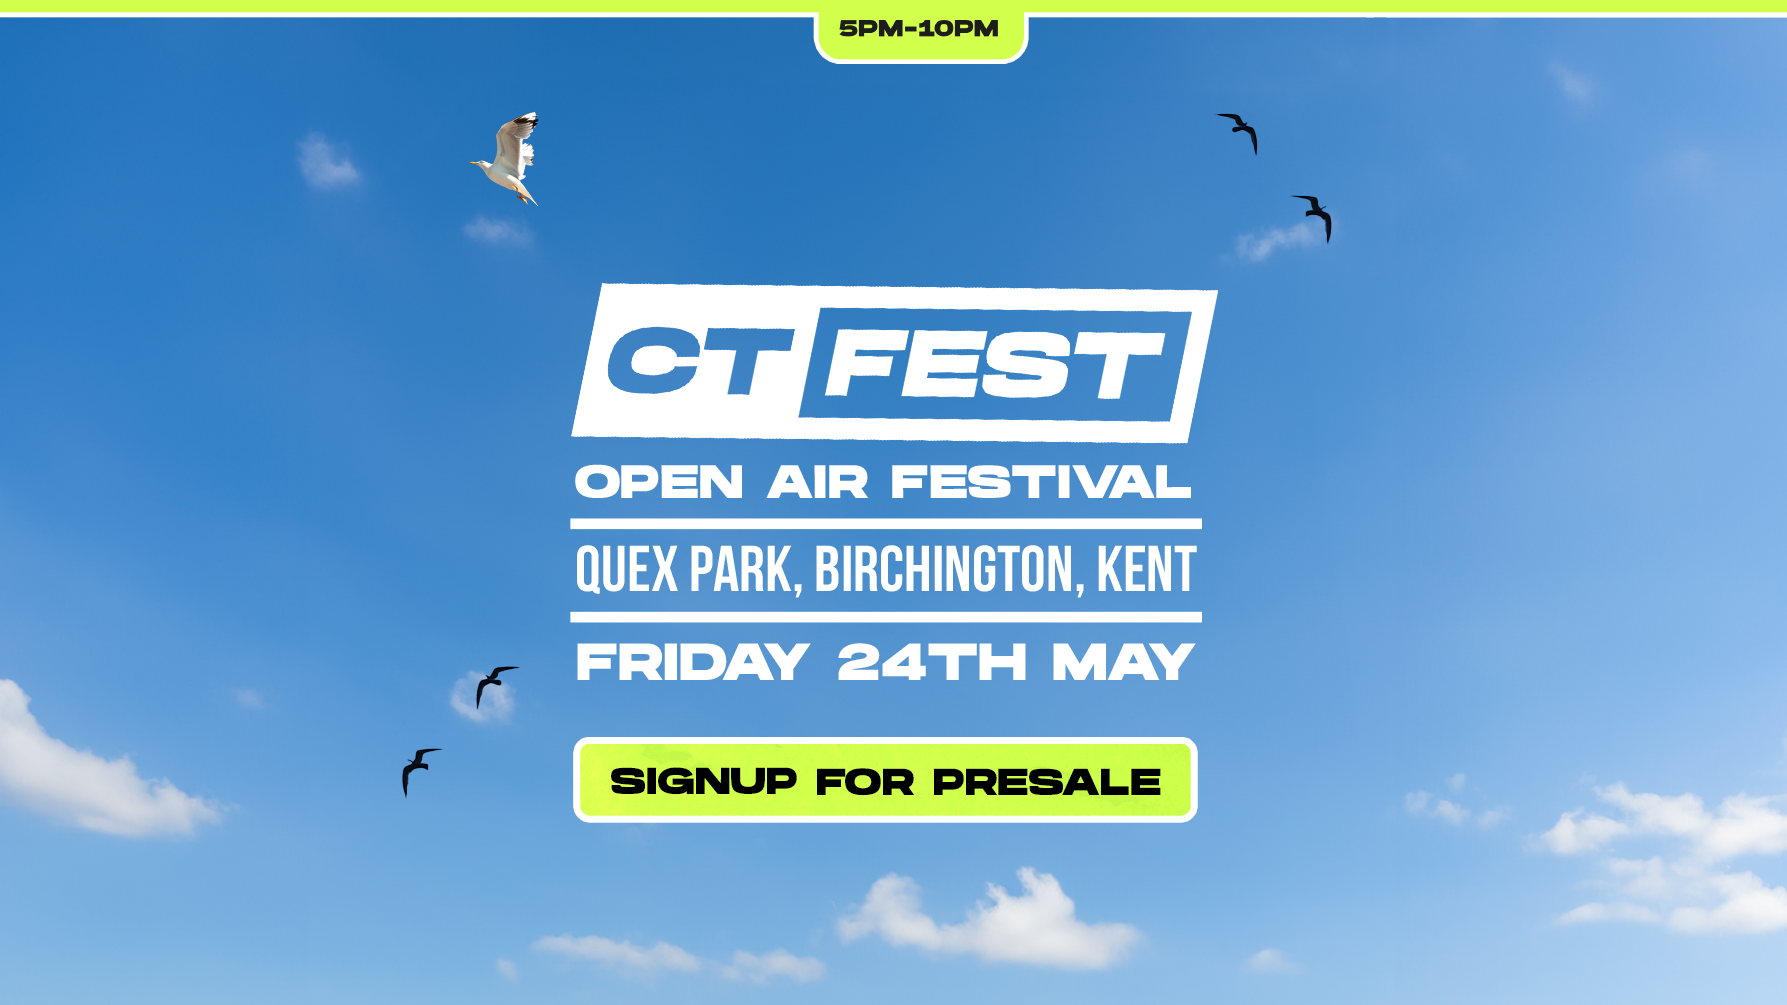 CT Fest ∙ OPEN AIR FESTIVAL SIGNUP *only 23 signup spaces left*